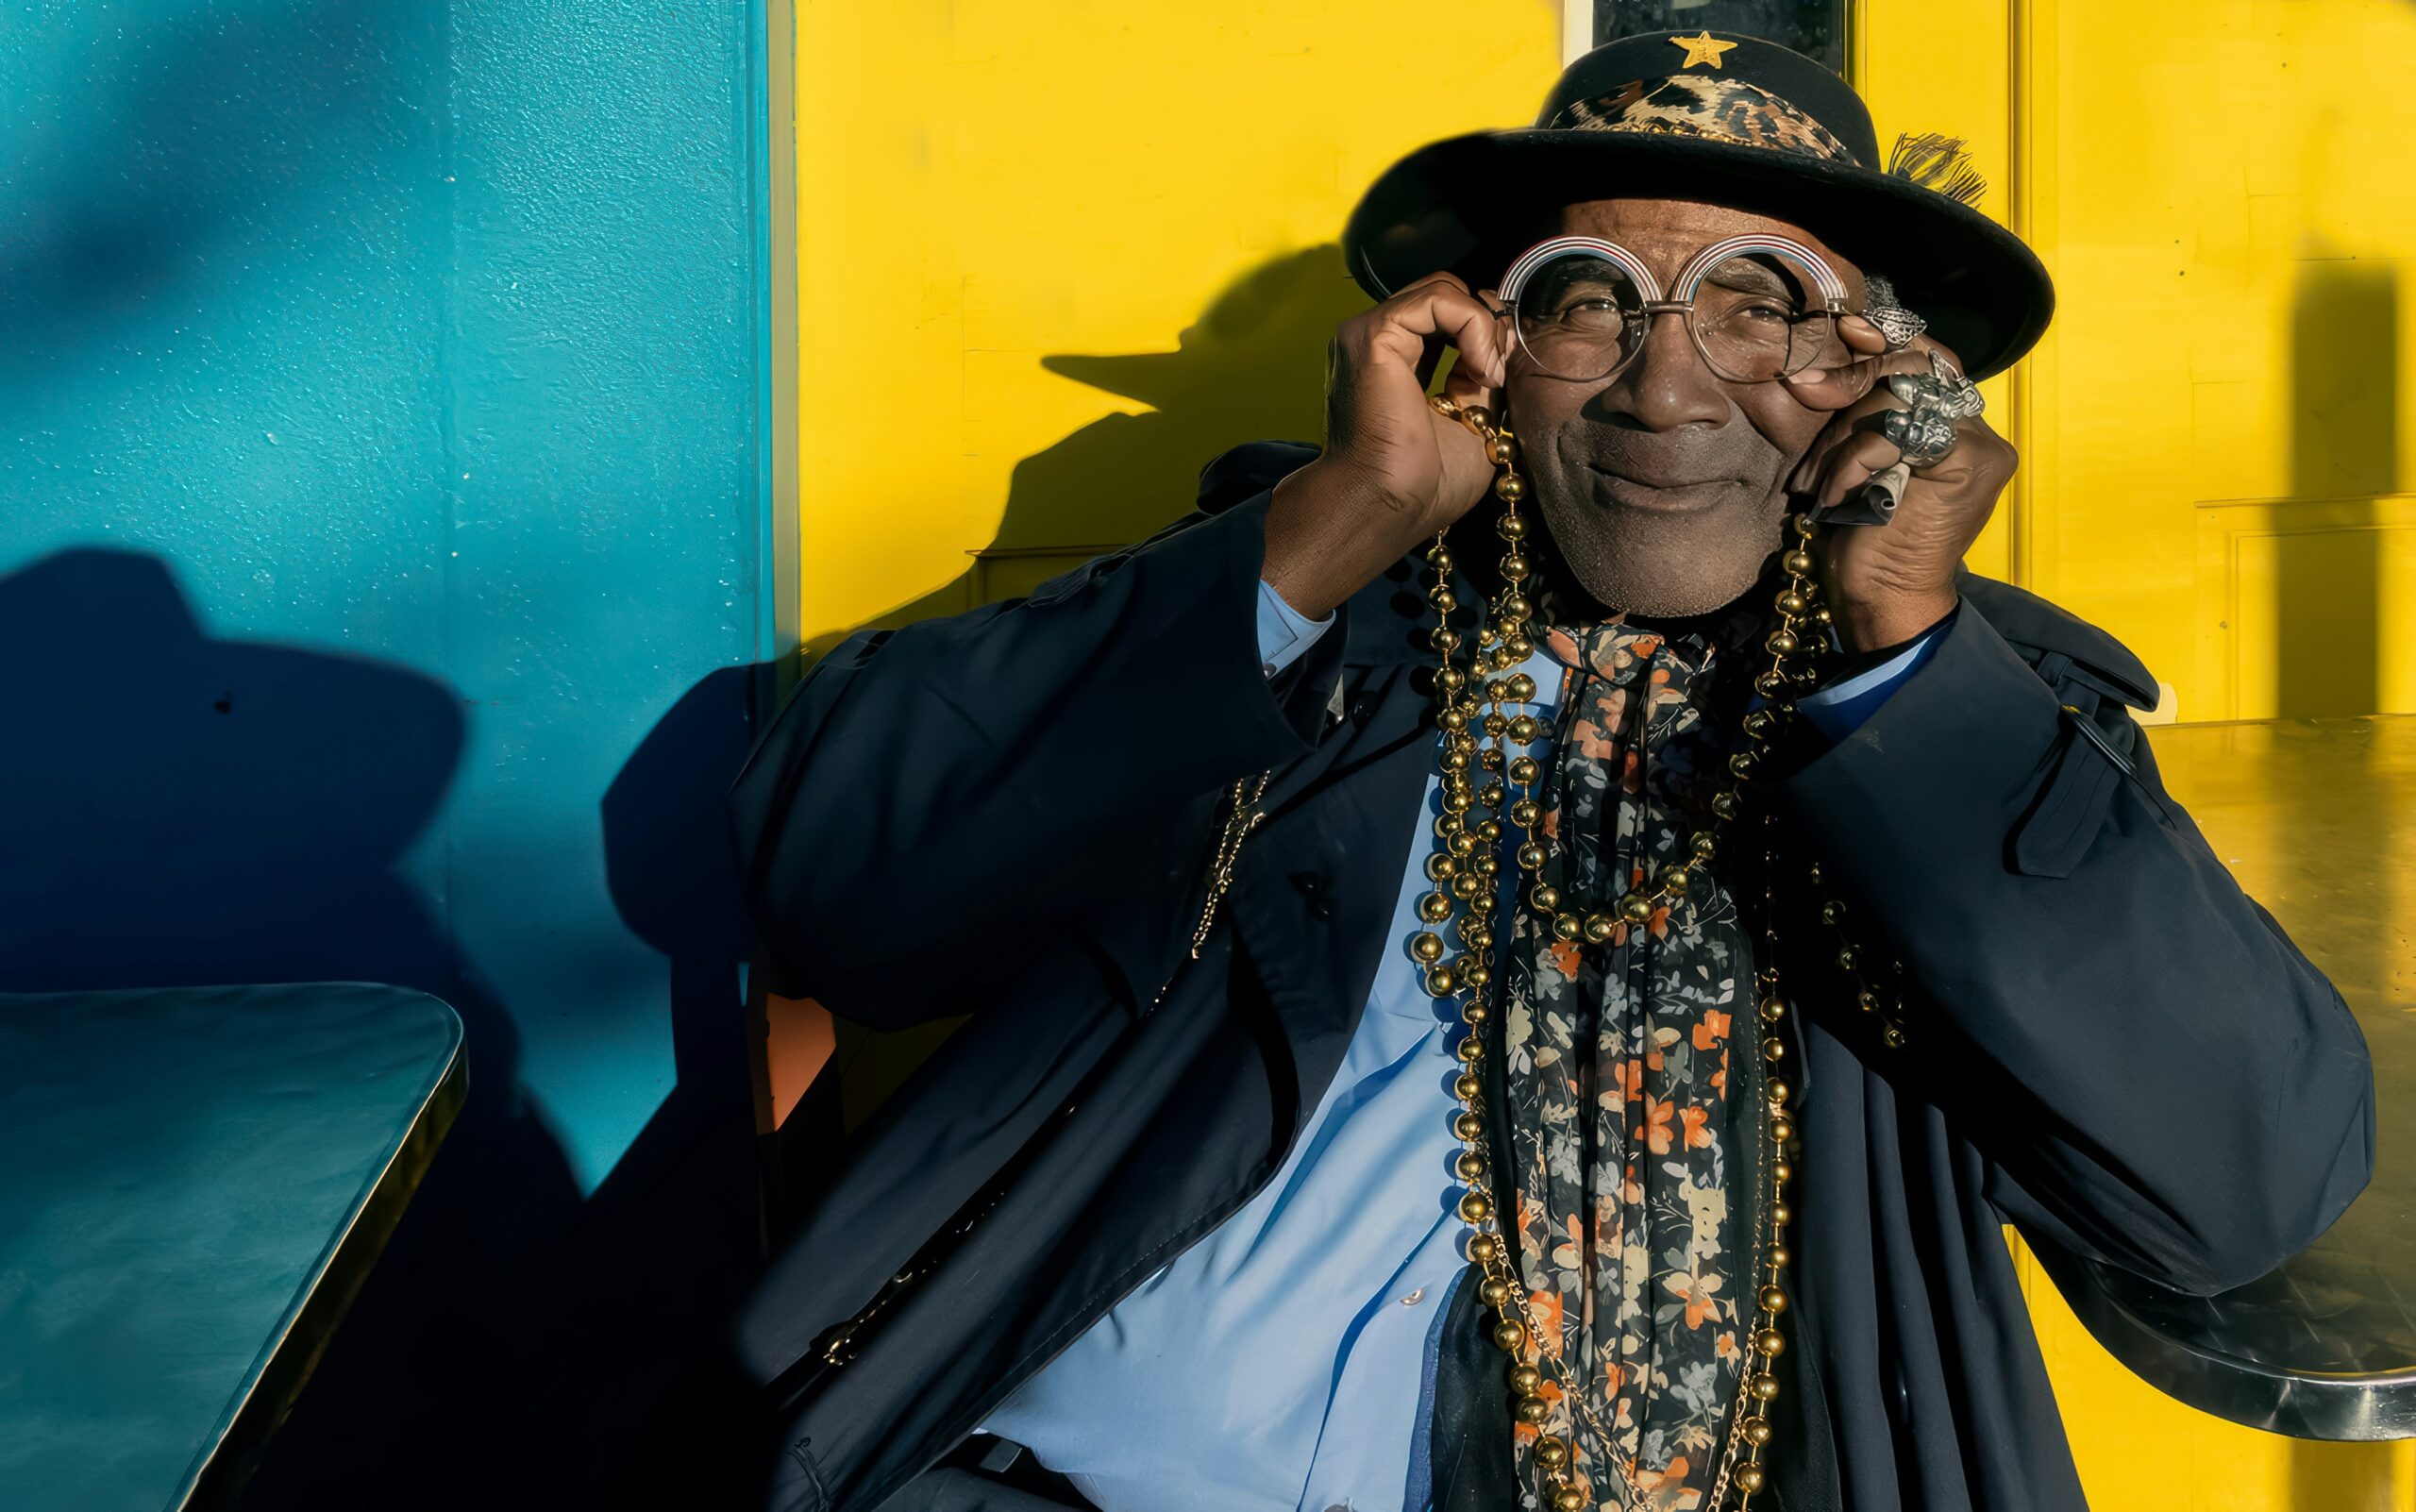 Mardi Gras is why one of the best times to visit New Orleans is March. 
pictured: an older Black man flaunting Mardi Gras souvenirs